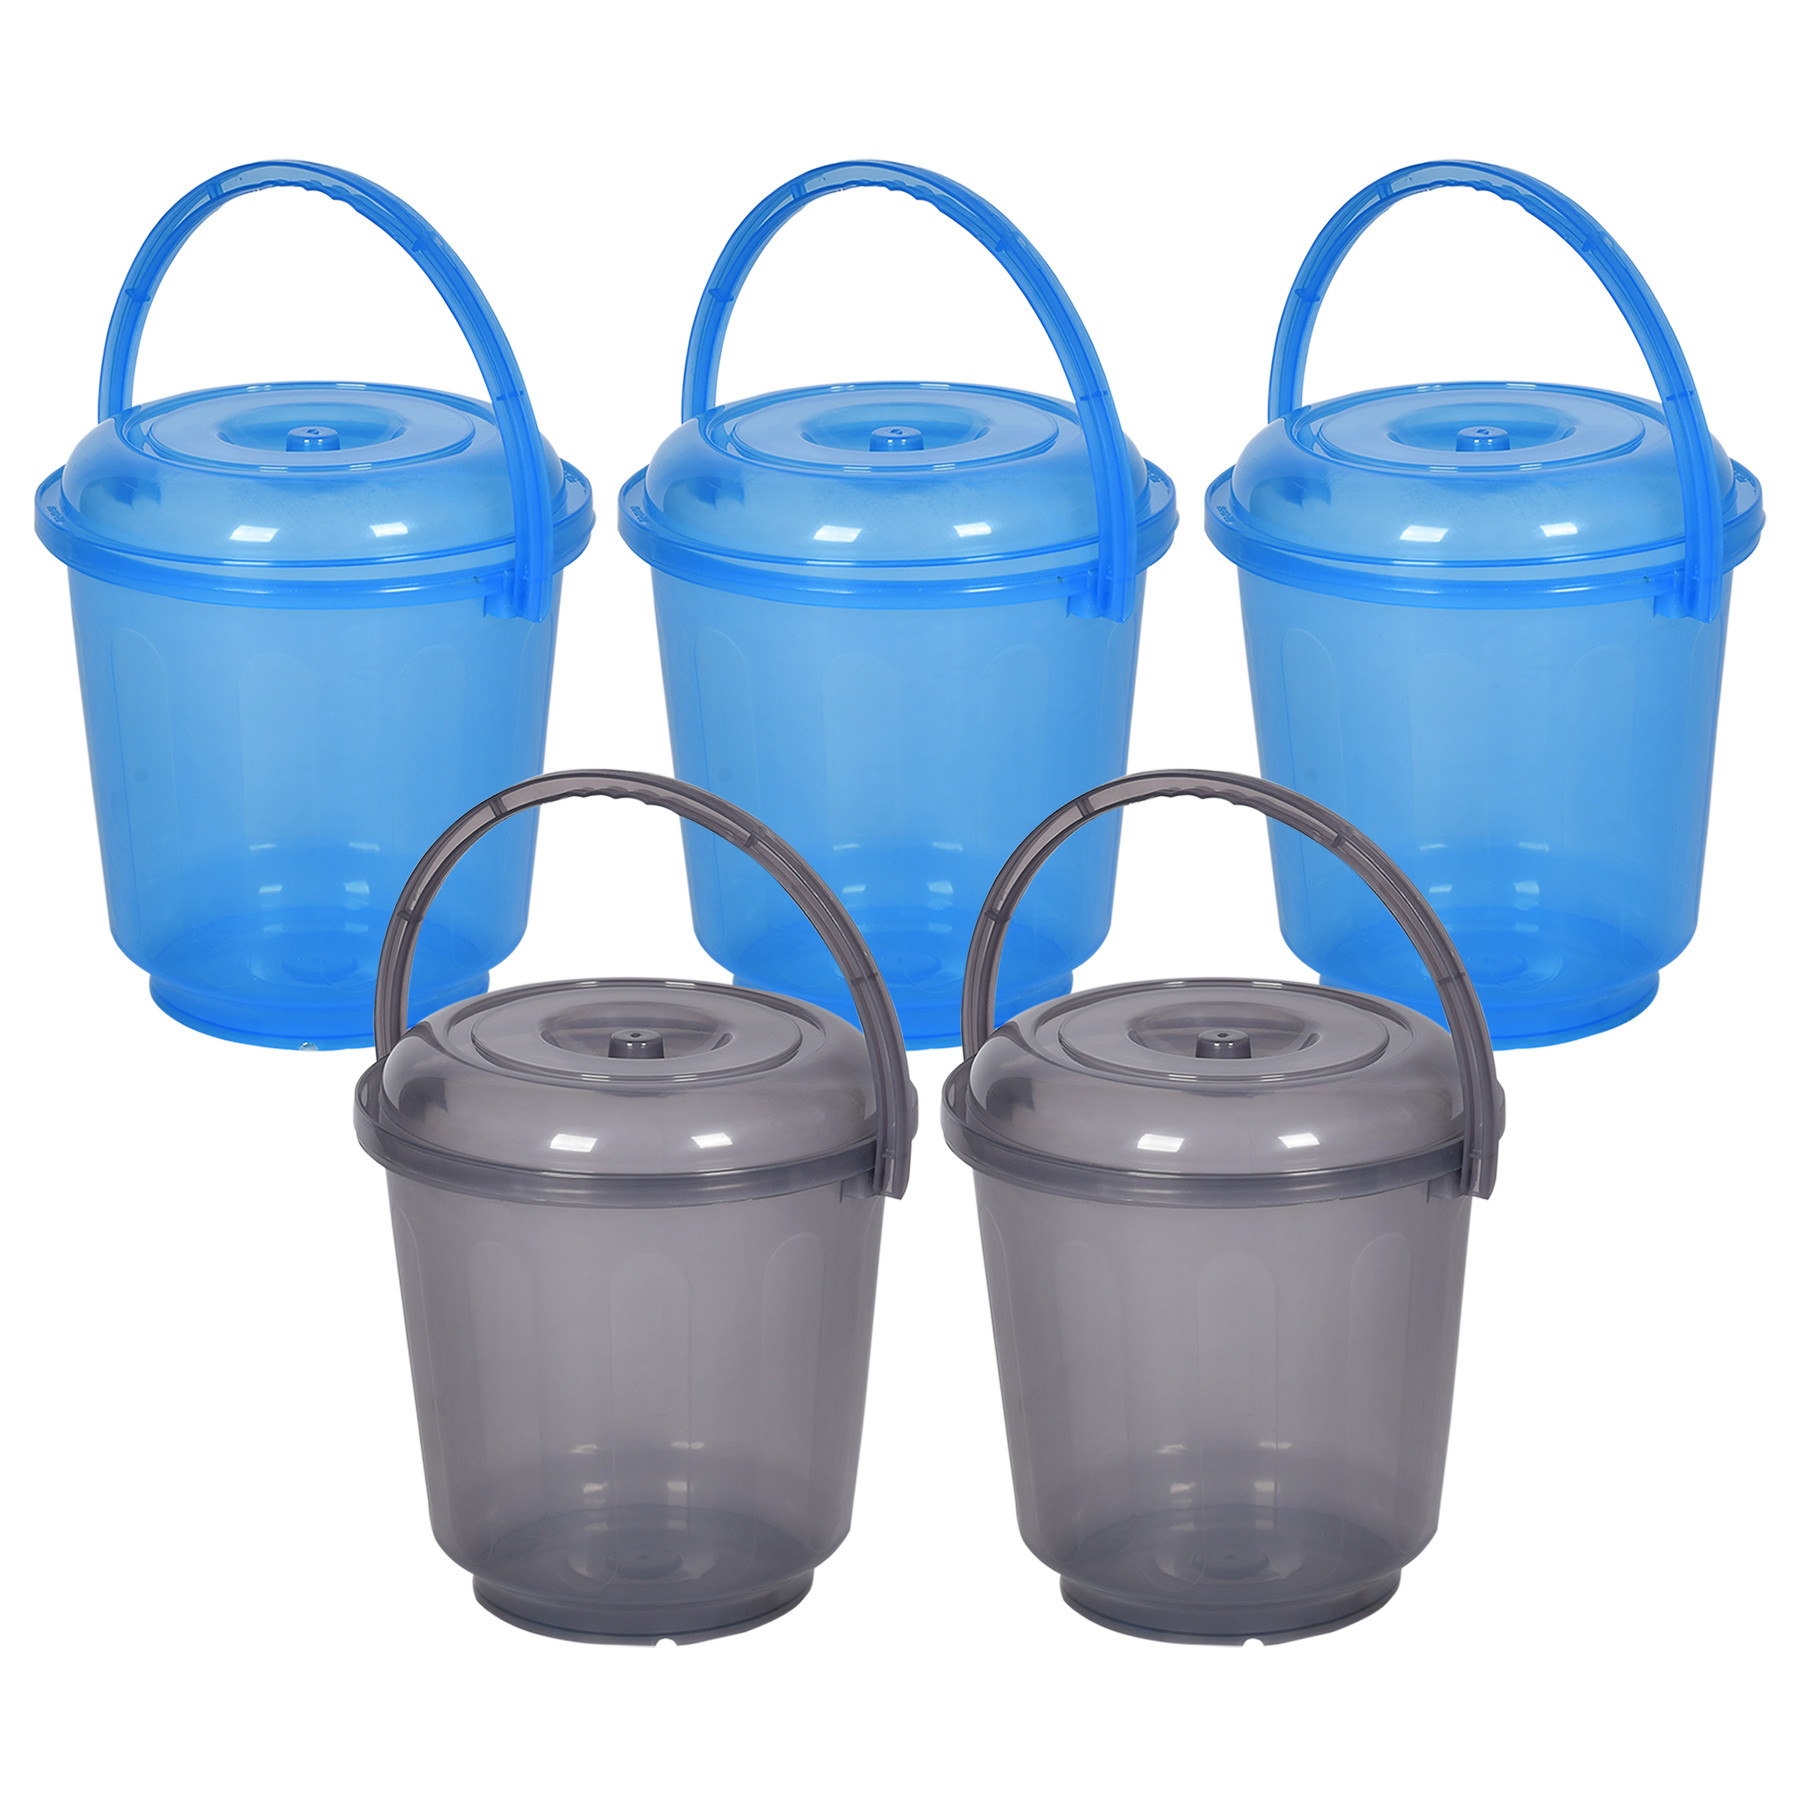 Kuber Industries Bucket | Bathroom Bucket | Utility Bucket for Daily Use | Water Storage Bucket | Bathing Bucket with Handle & Lid | 13 LTR | SUPER-013 | Transparent | Blue & Gray